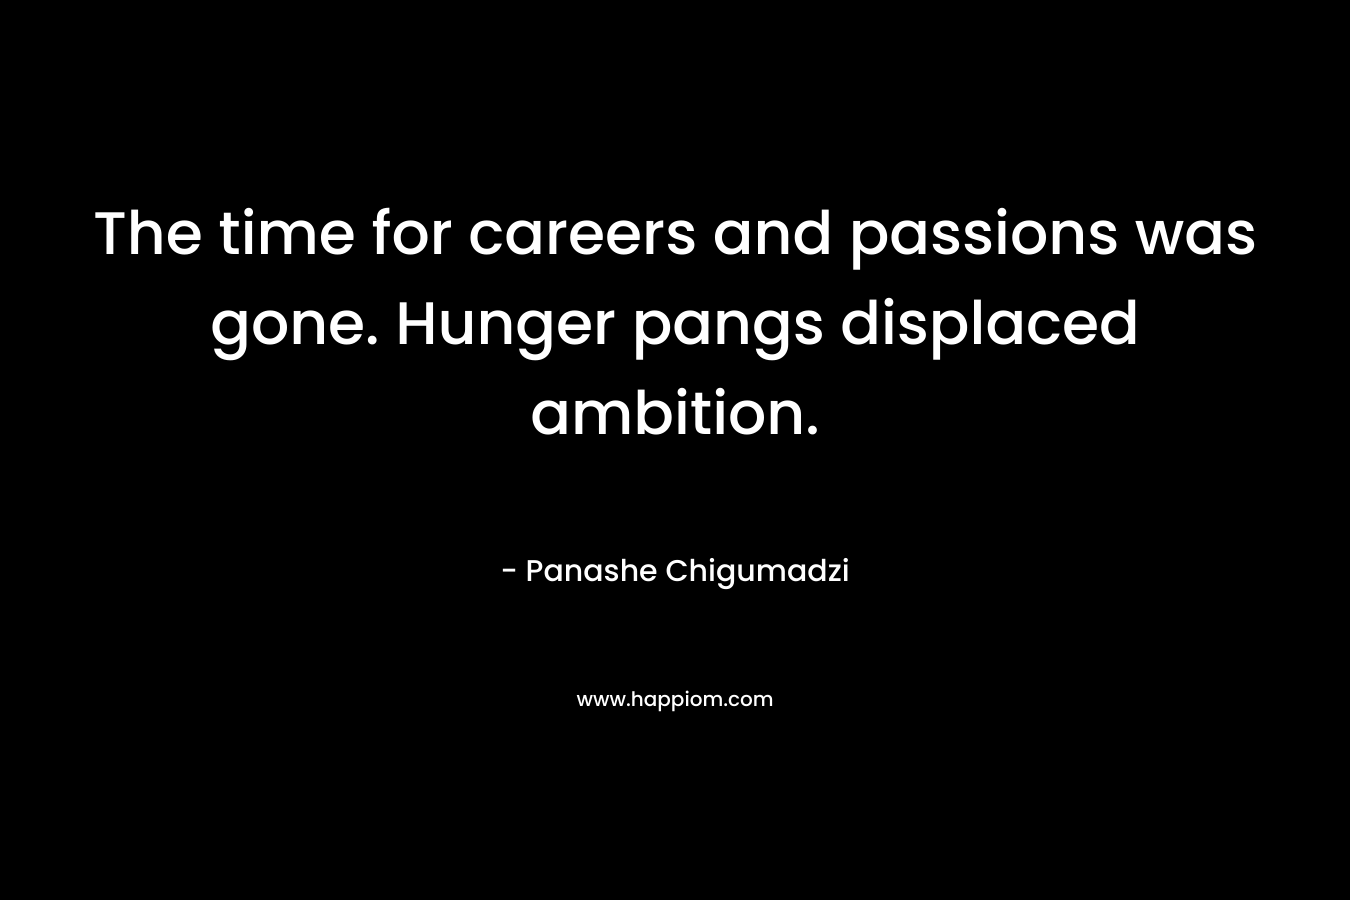 The time for careers and passions was gone. Hunger pangs displaced ambition.